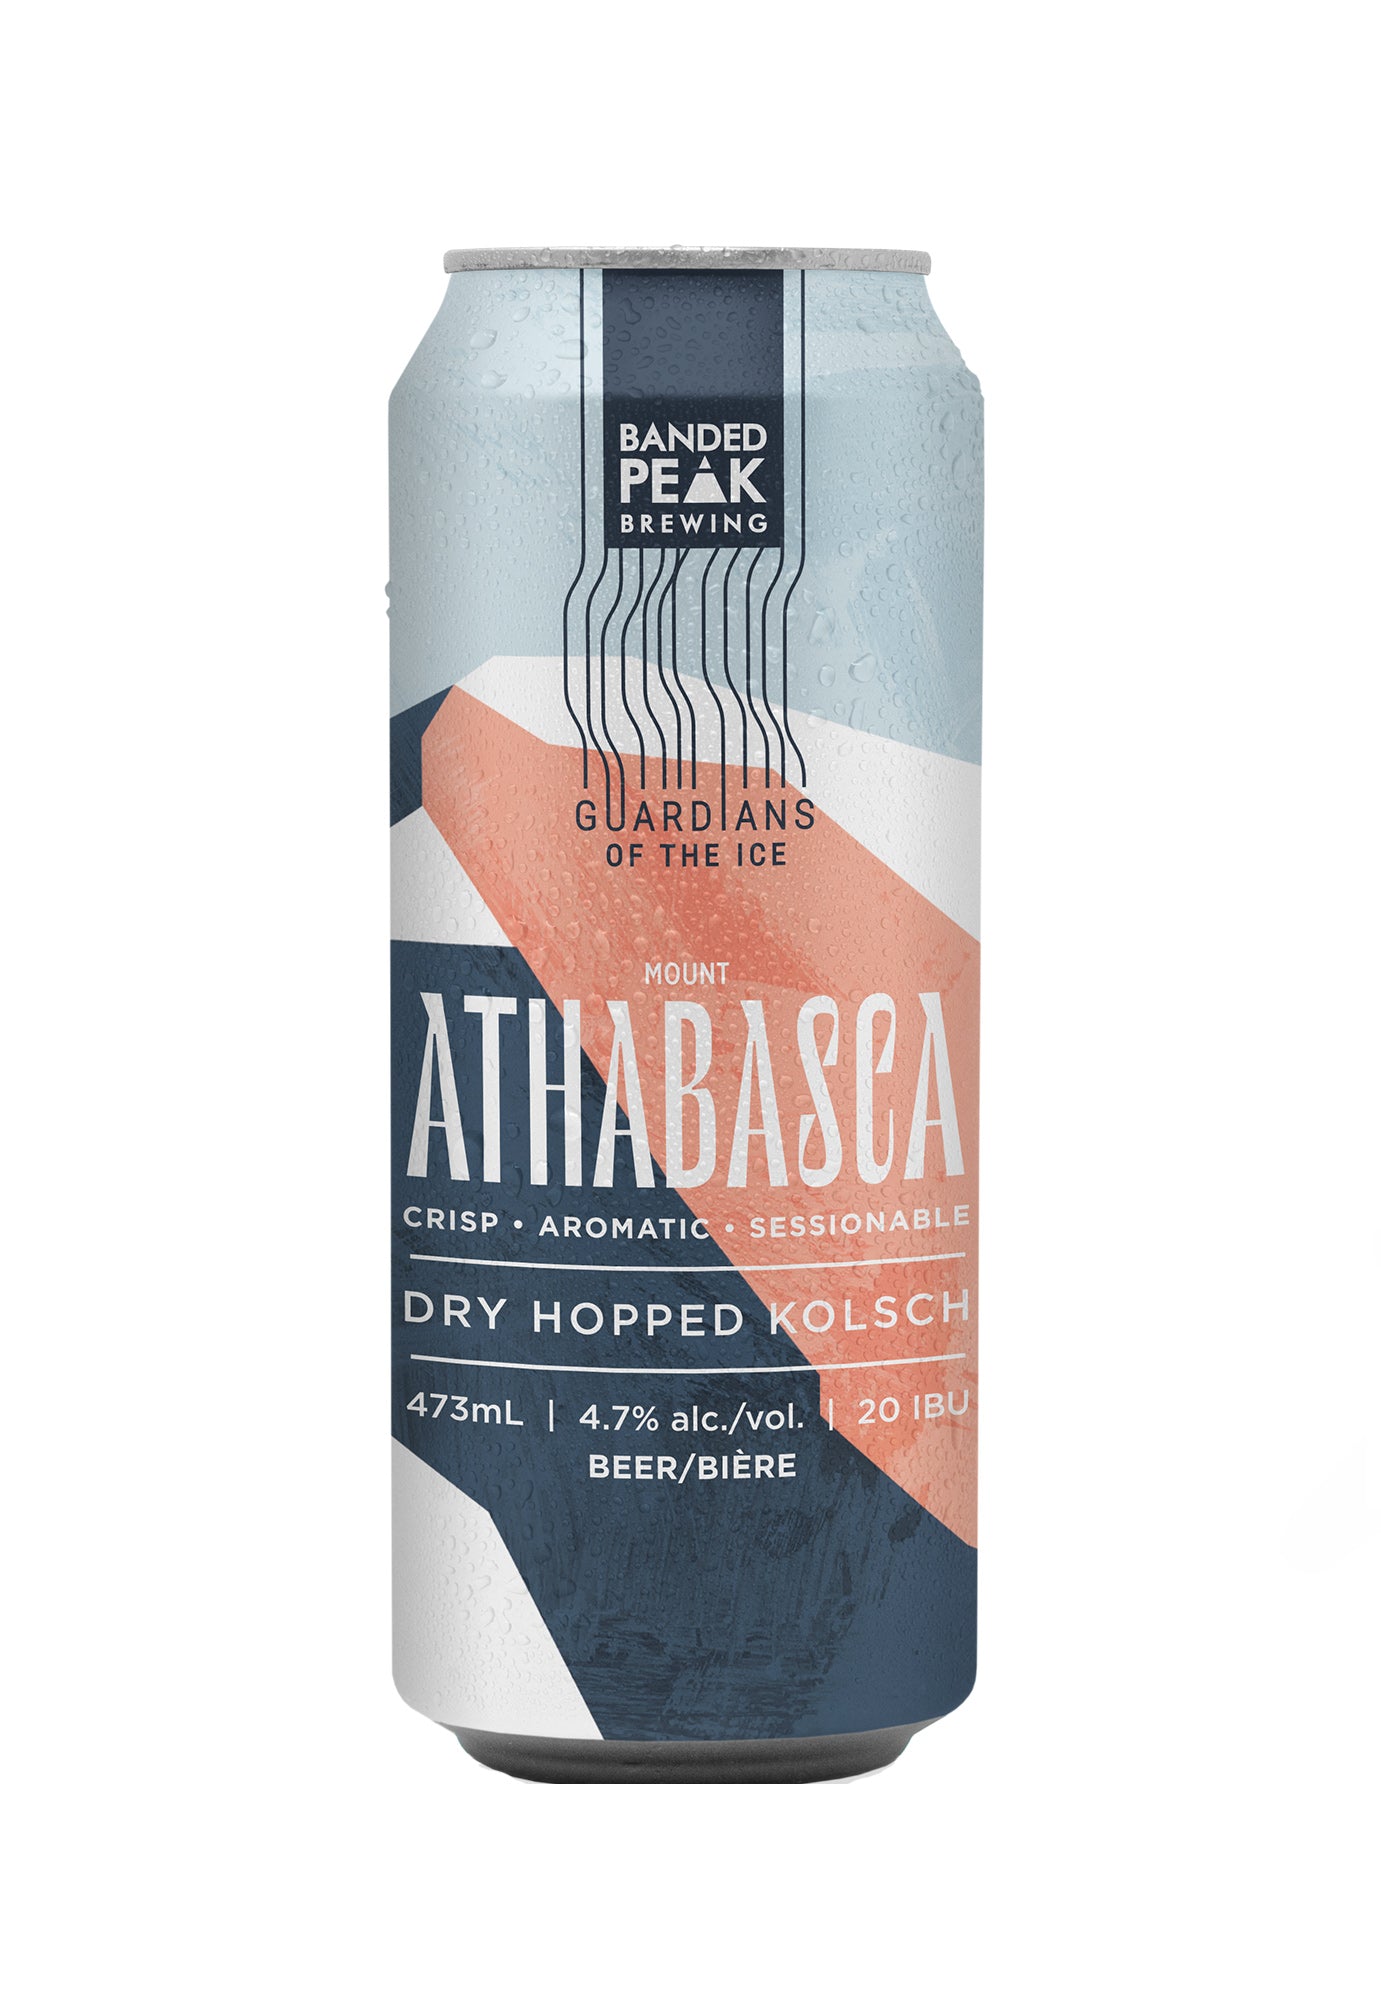 Banded Peak Mount Athabasca Dry Hopped Kolsch 473 ml - 4 Cans